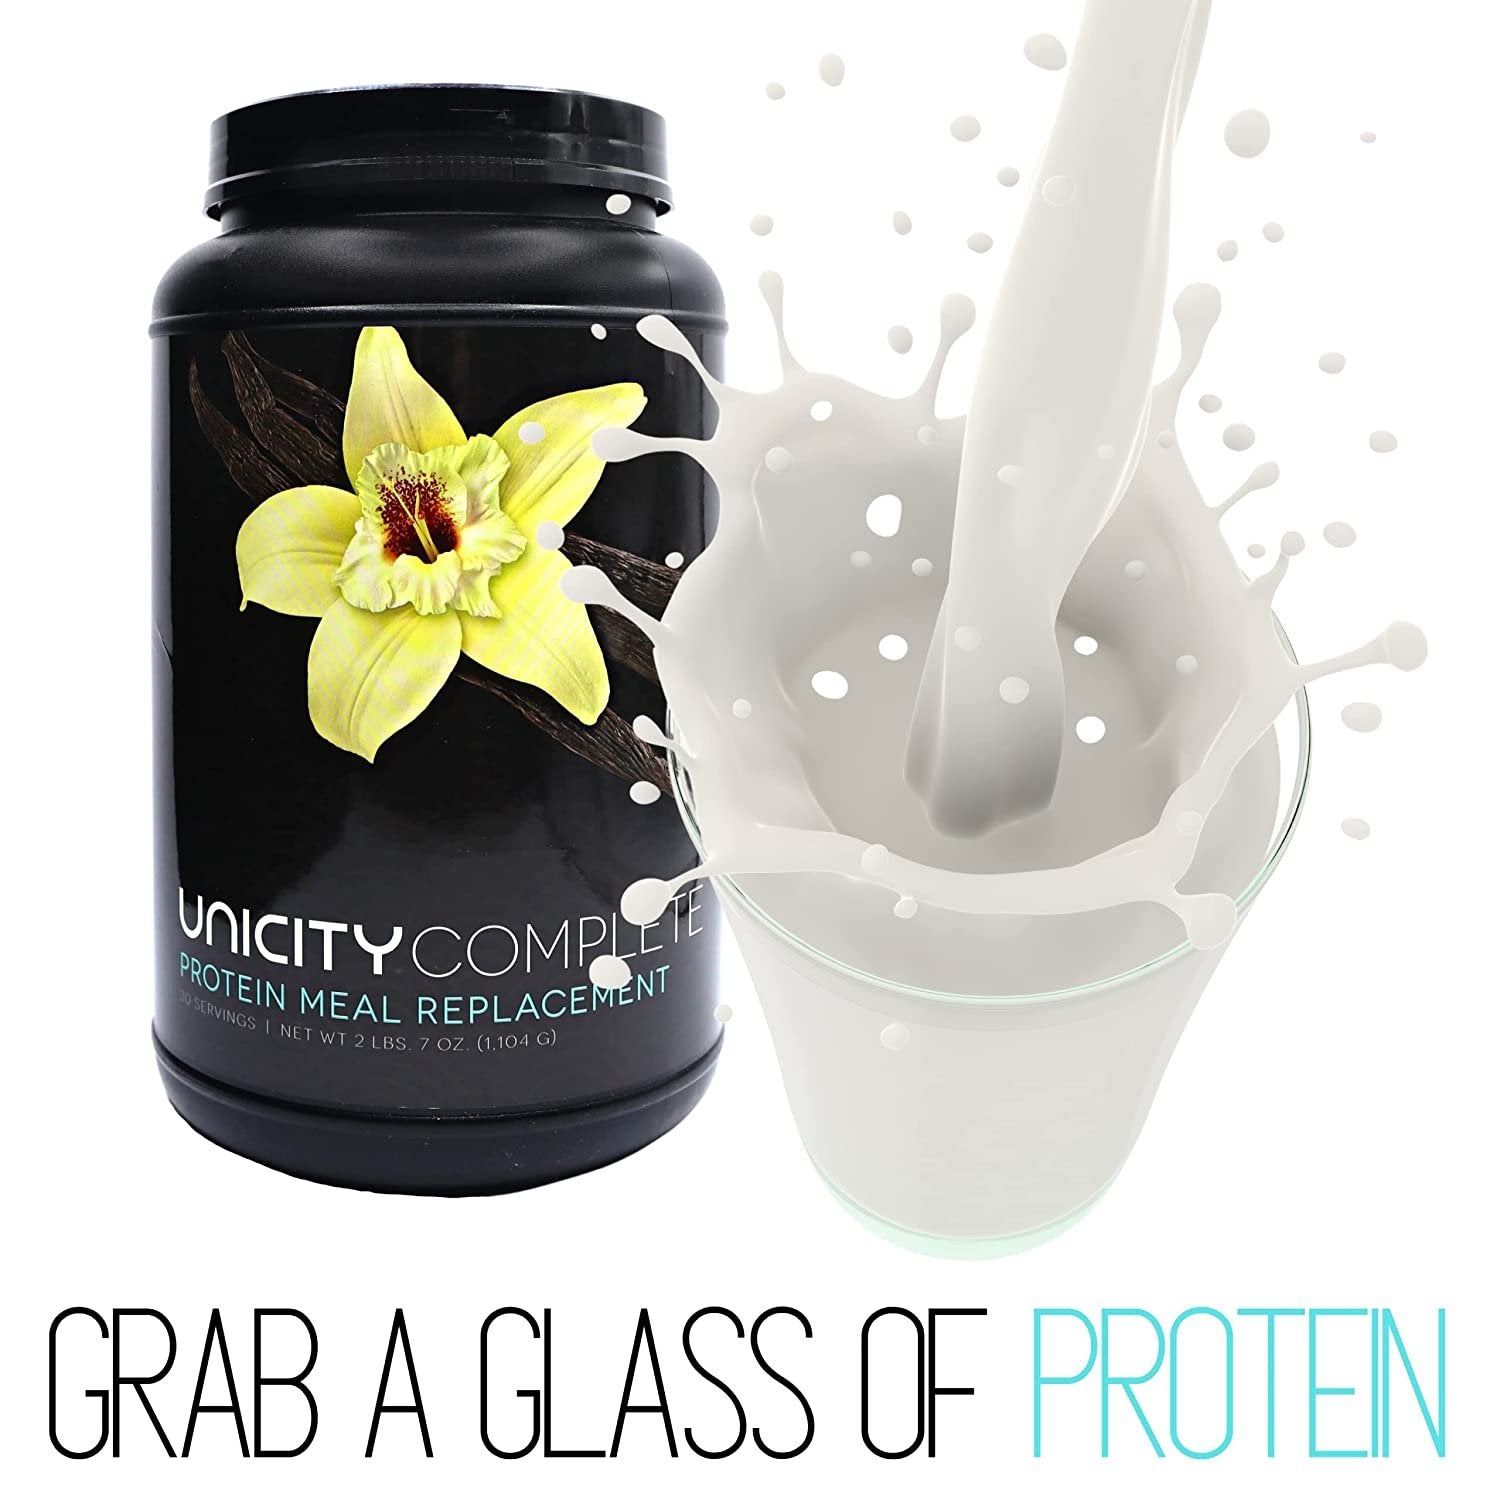 Unicity Complete Vanilla Protein Meal Replacement - Protein Shake Drink Mix with Stevia Extract - Gluten Free - Vanilla Flavored - 30 Servings (2 Lbs 7 Oz)